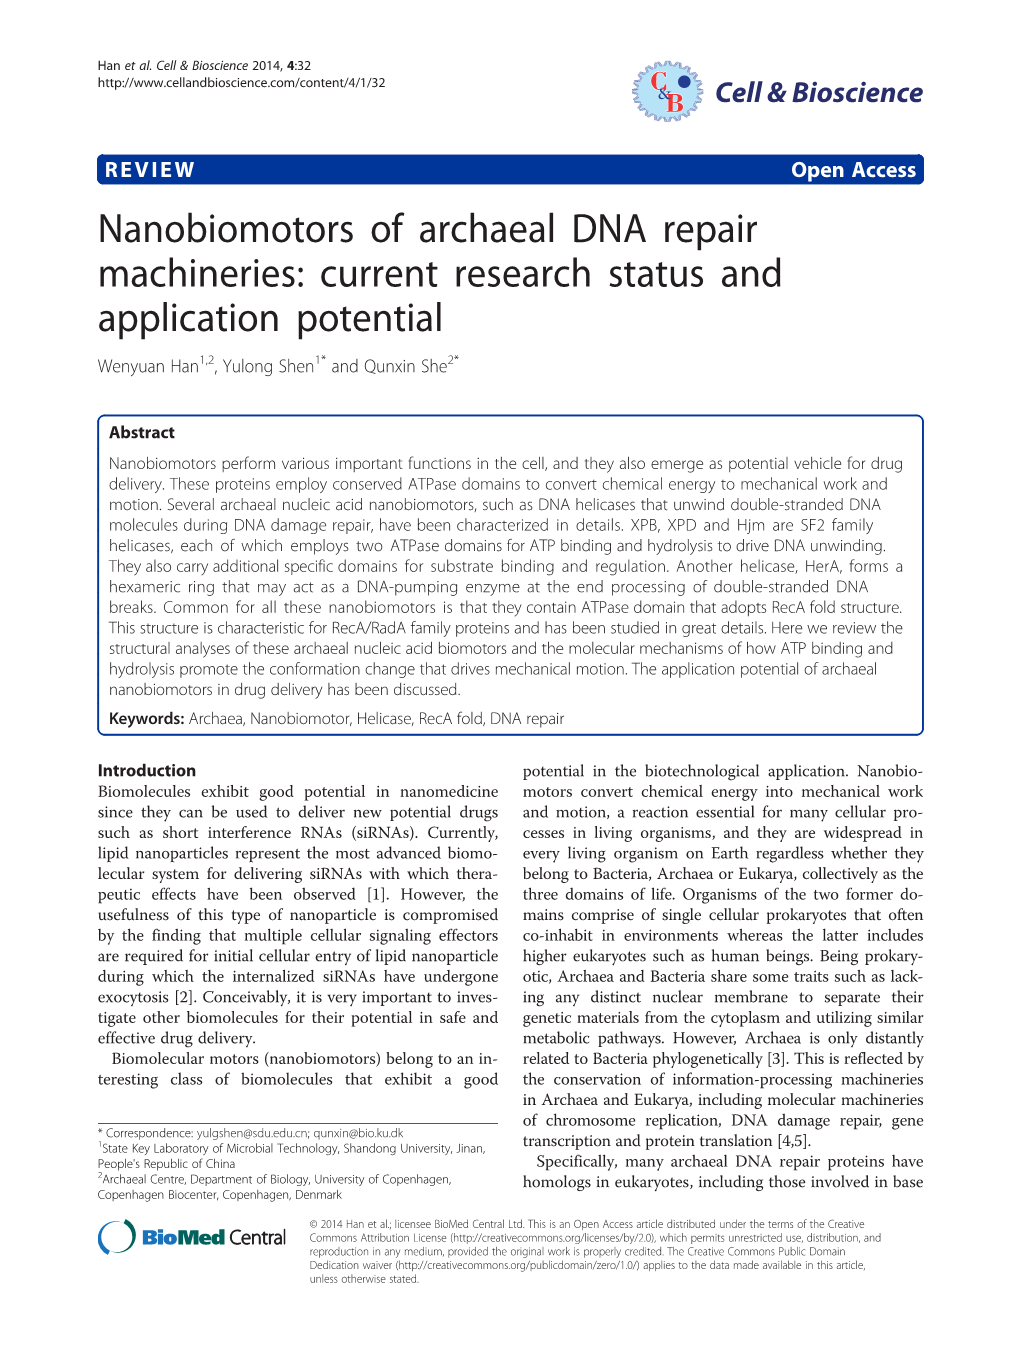 VIEW Open Access Nanobiomotors of Archaeal DNA Repair Machineries: Current Research Status and Application Potential Wenyuan Han1,2, Yulong Shen1* and Qunxin She2*